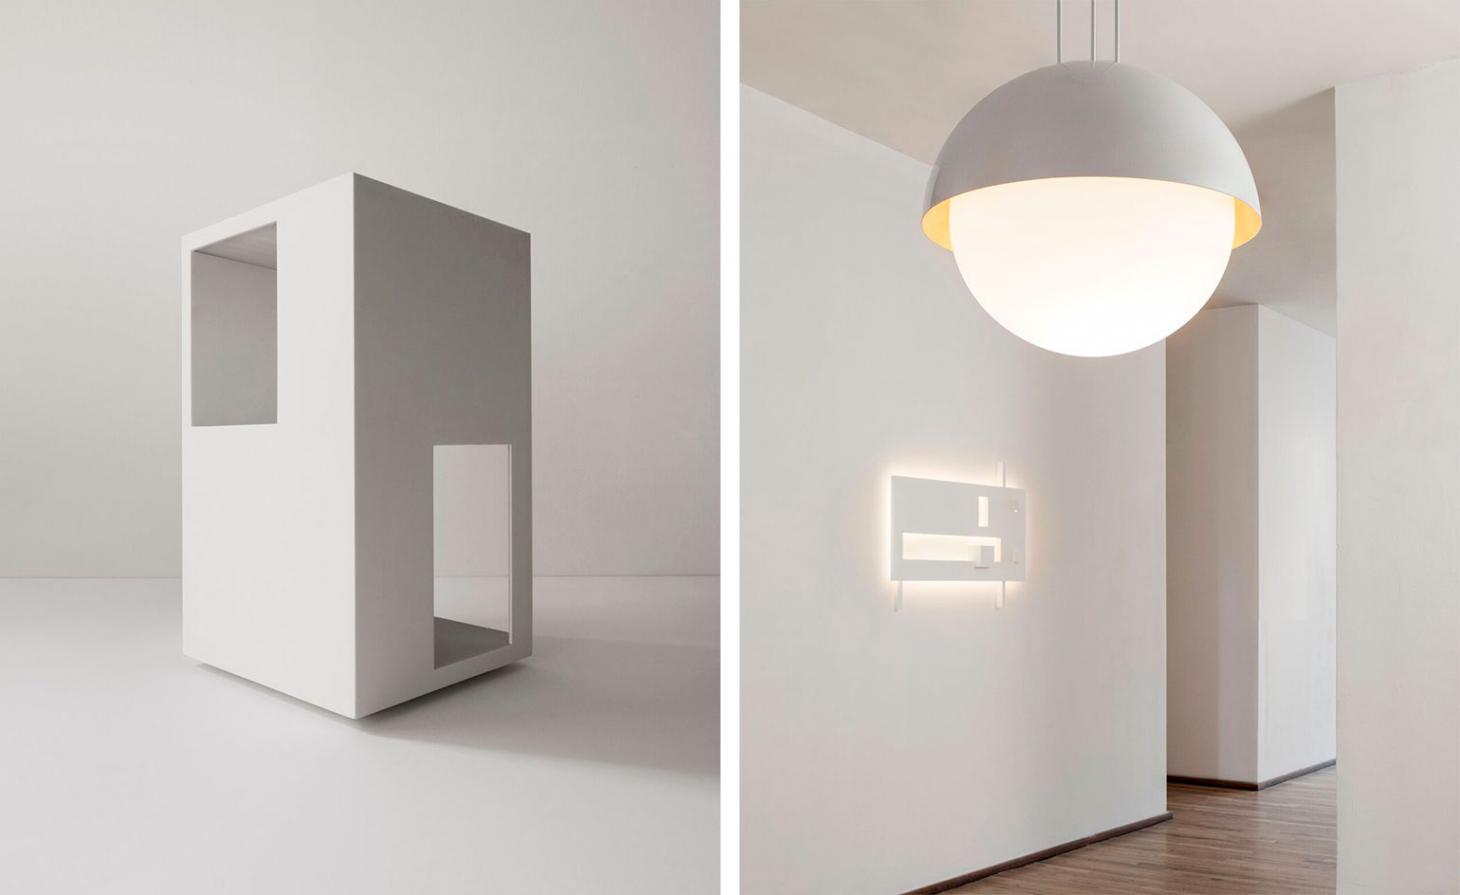 richard meier debuts new lighting collection at ralph pucci gallery new york-10